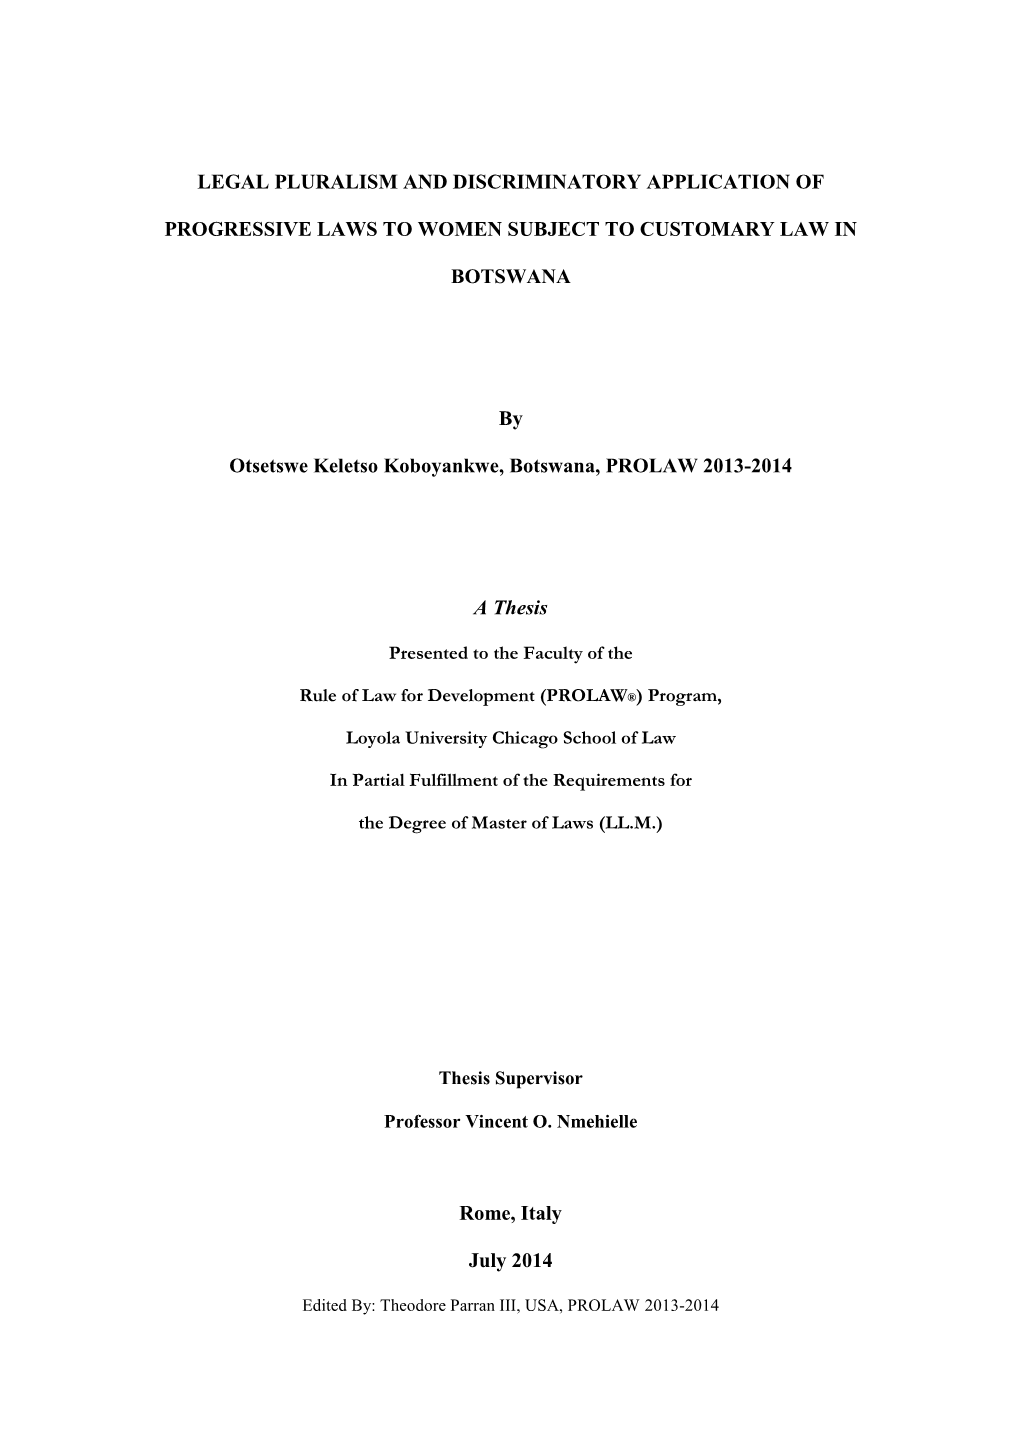 Legal Pluralism and Discriminatory Application of Progressive Laws To